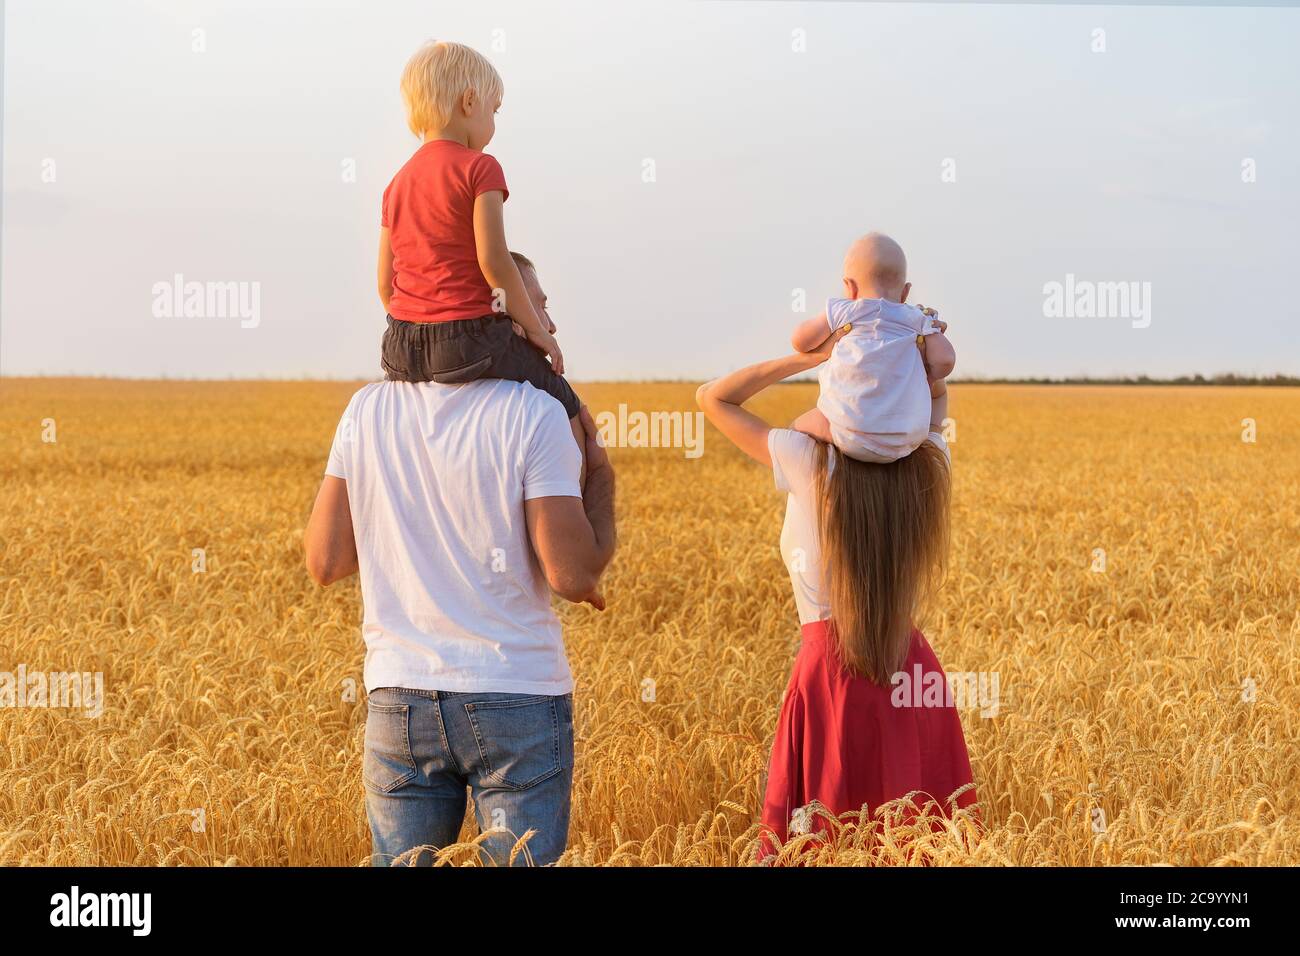 Young family in field with two young children. Kids sit on shoulders of parents. Rear view Stock Photo